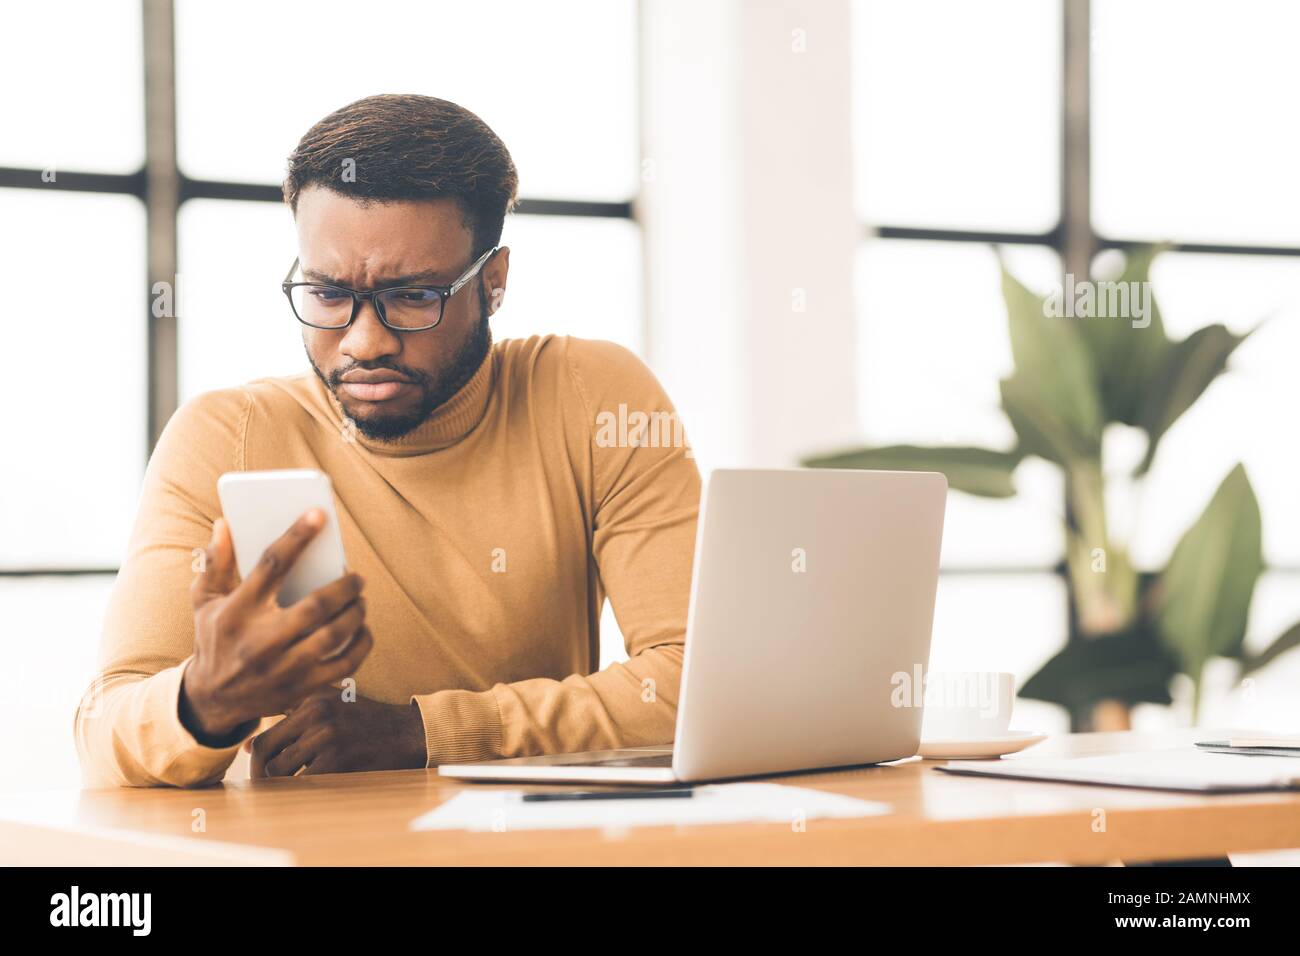 Surprised young afro manager looking at his cellphone Stock Photo